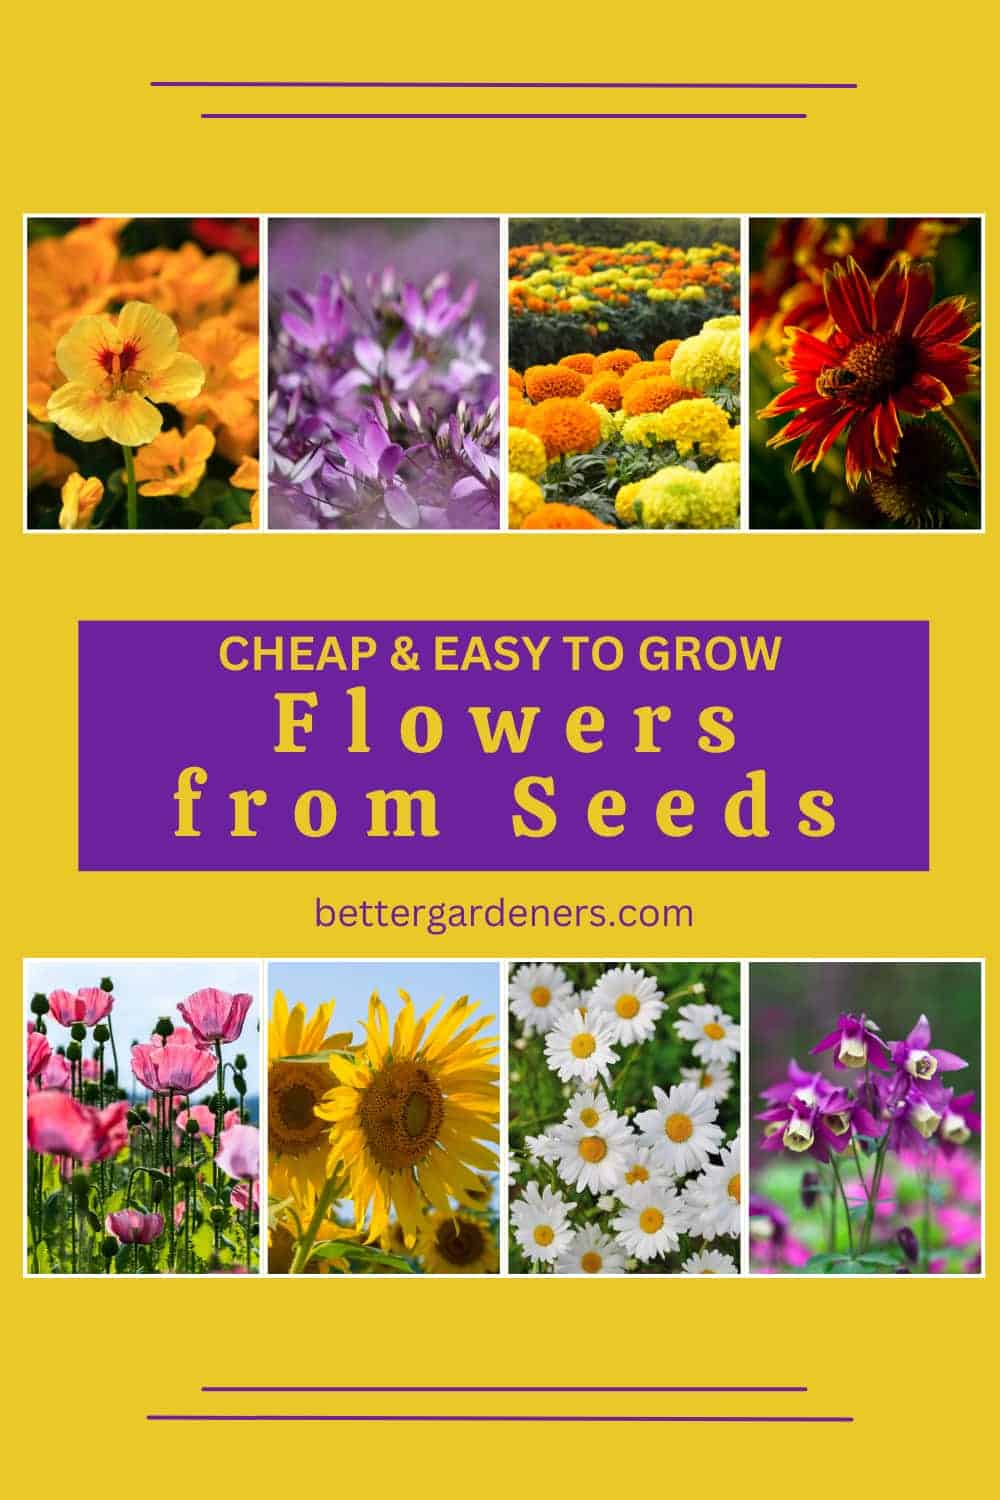 15 Cheap & Easy to Grow Flowers from Seeds